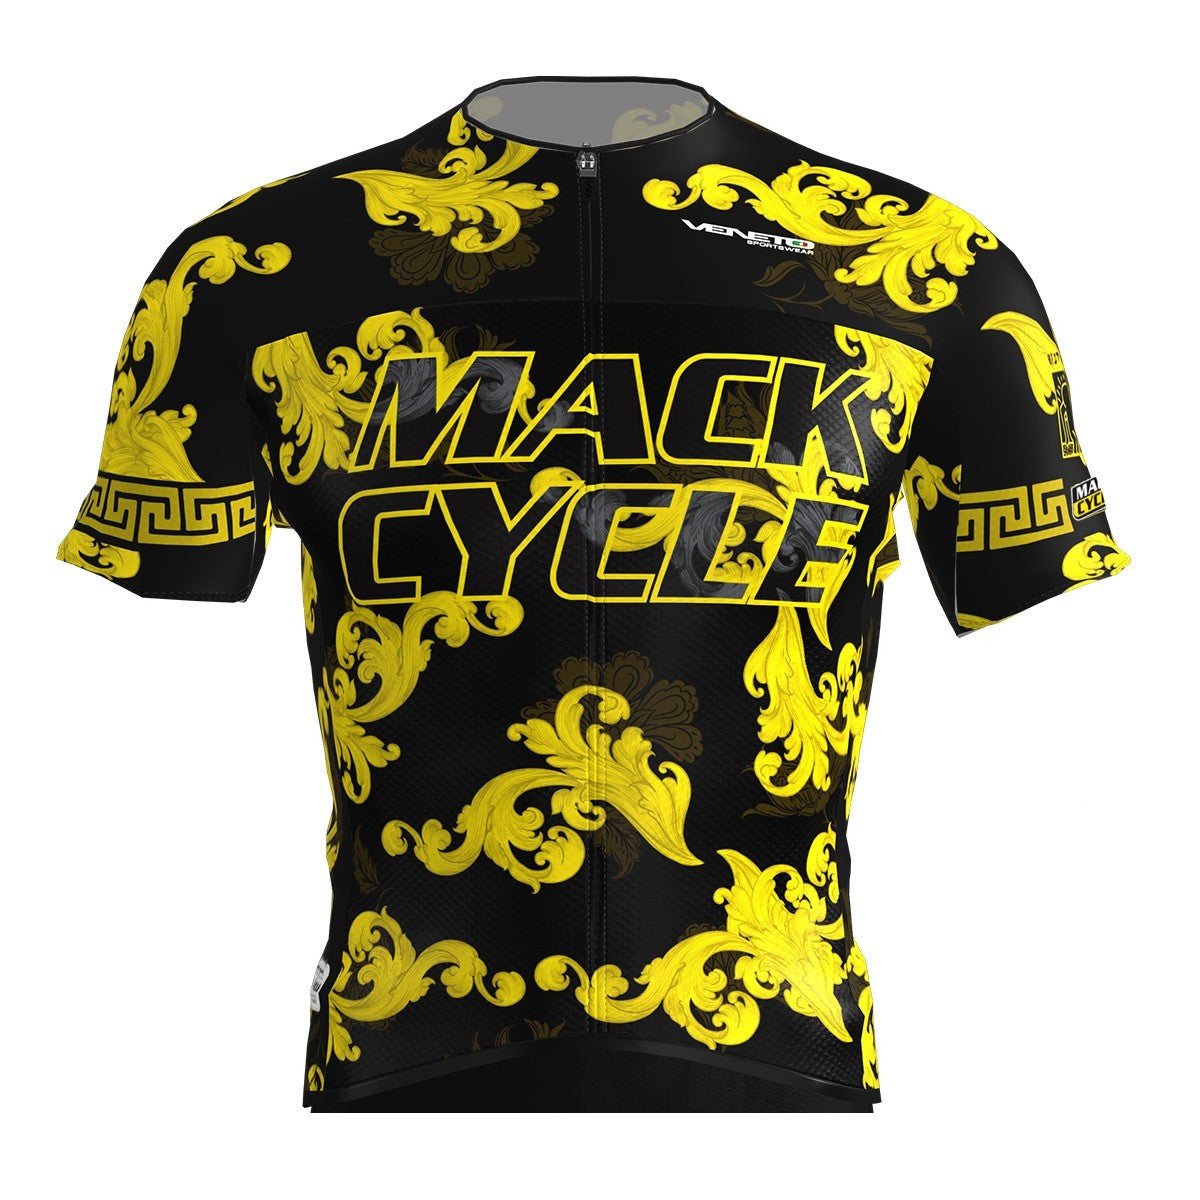 Men's Mack Cycle Short Sleeve Cycling Jersey ( Maximalism Collection )